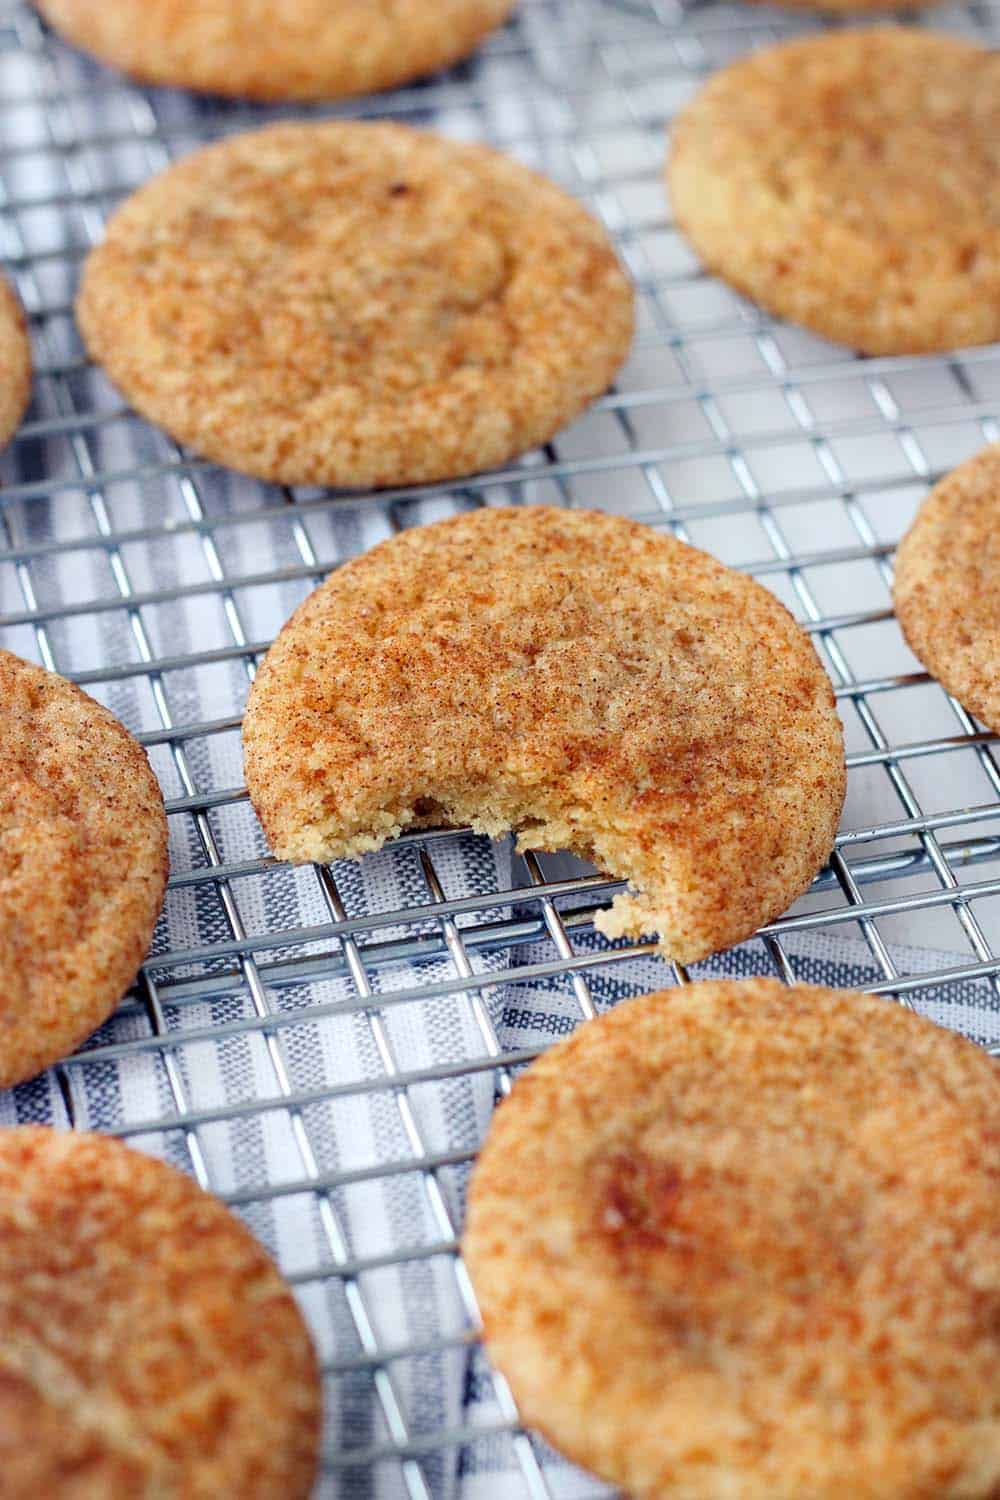 These Pumpkin Spice Snickerdoodles have warming pumpkin pie spices in the batter and are rolled in a mixture of brown and white sugars with cinnamon and more pumpkin pie spice! There's NO actual pumpkin used in this recipe. Make in bulk and keep in your freezer for a fun fall treat!